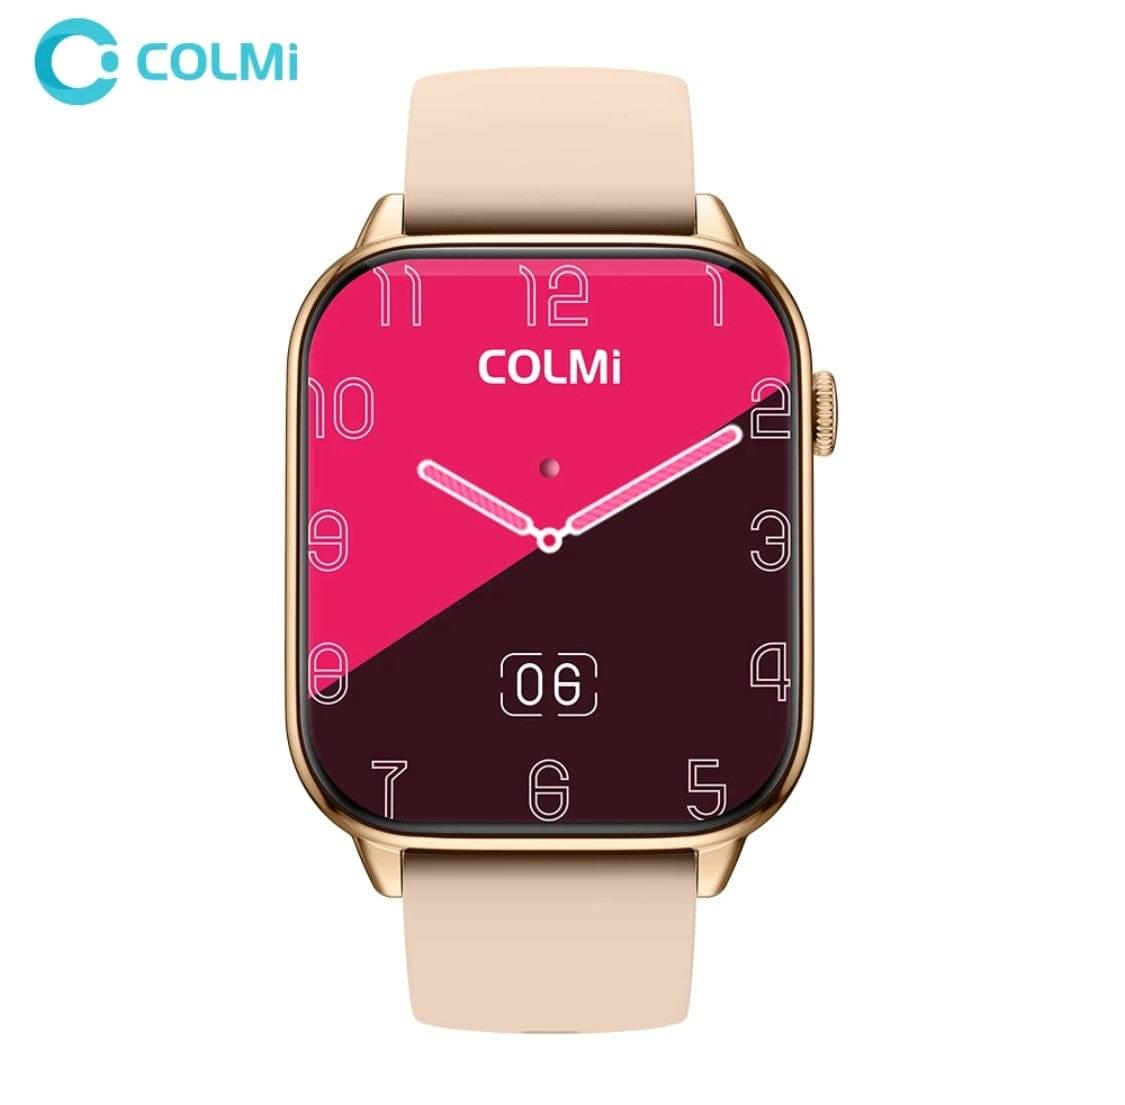 Colmi C61 Smart Watch - Rose Gold | Vivid Nuance South Africa